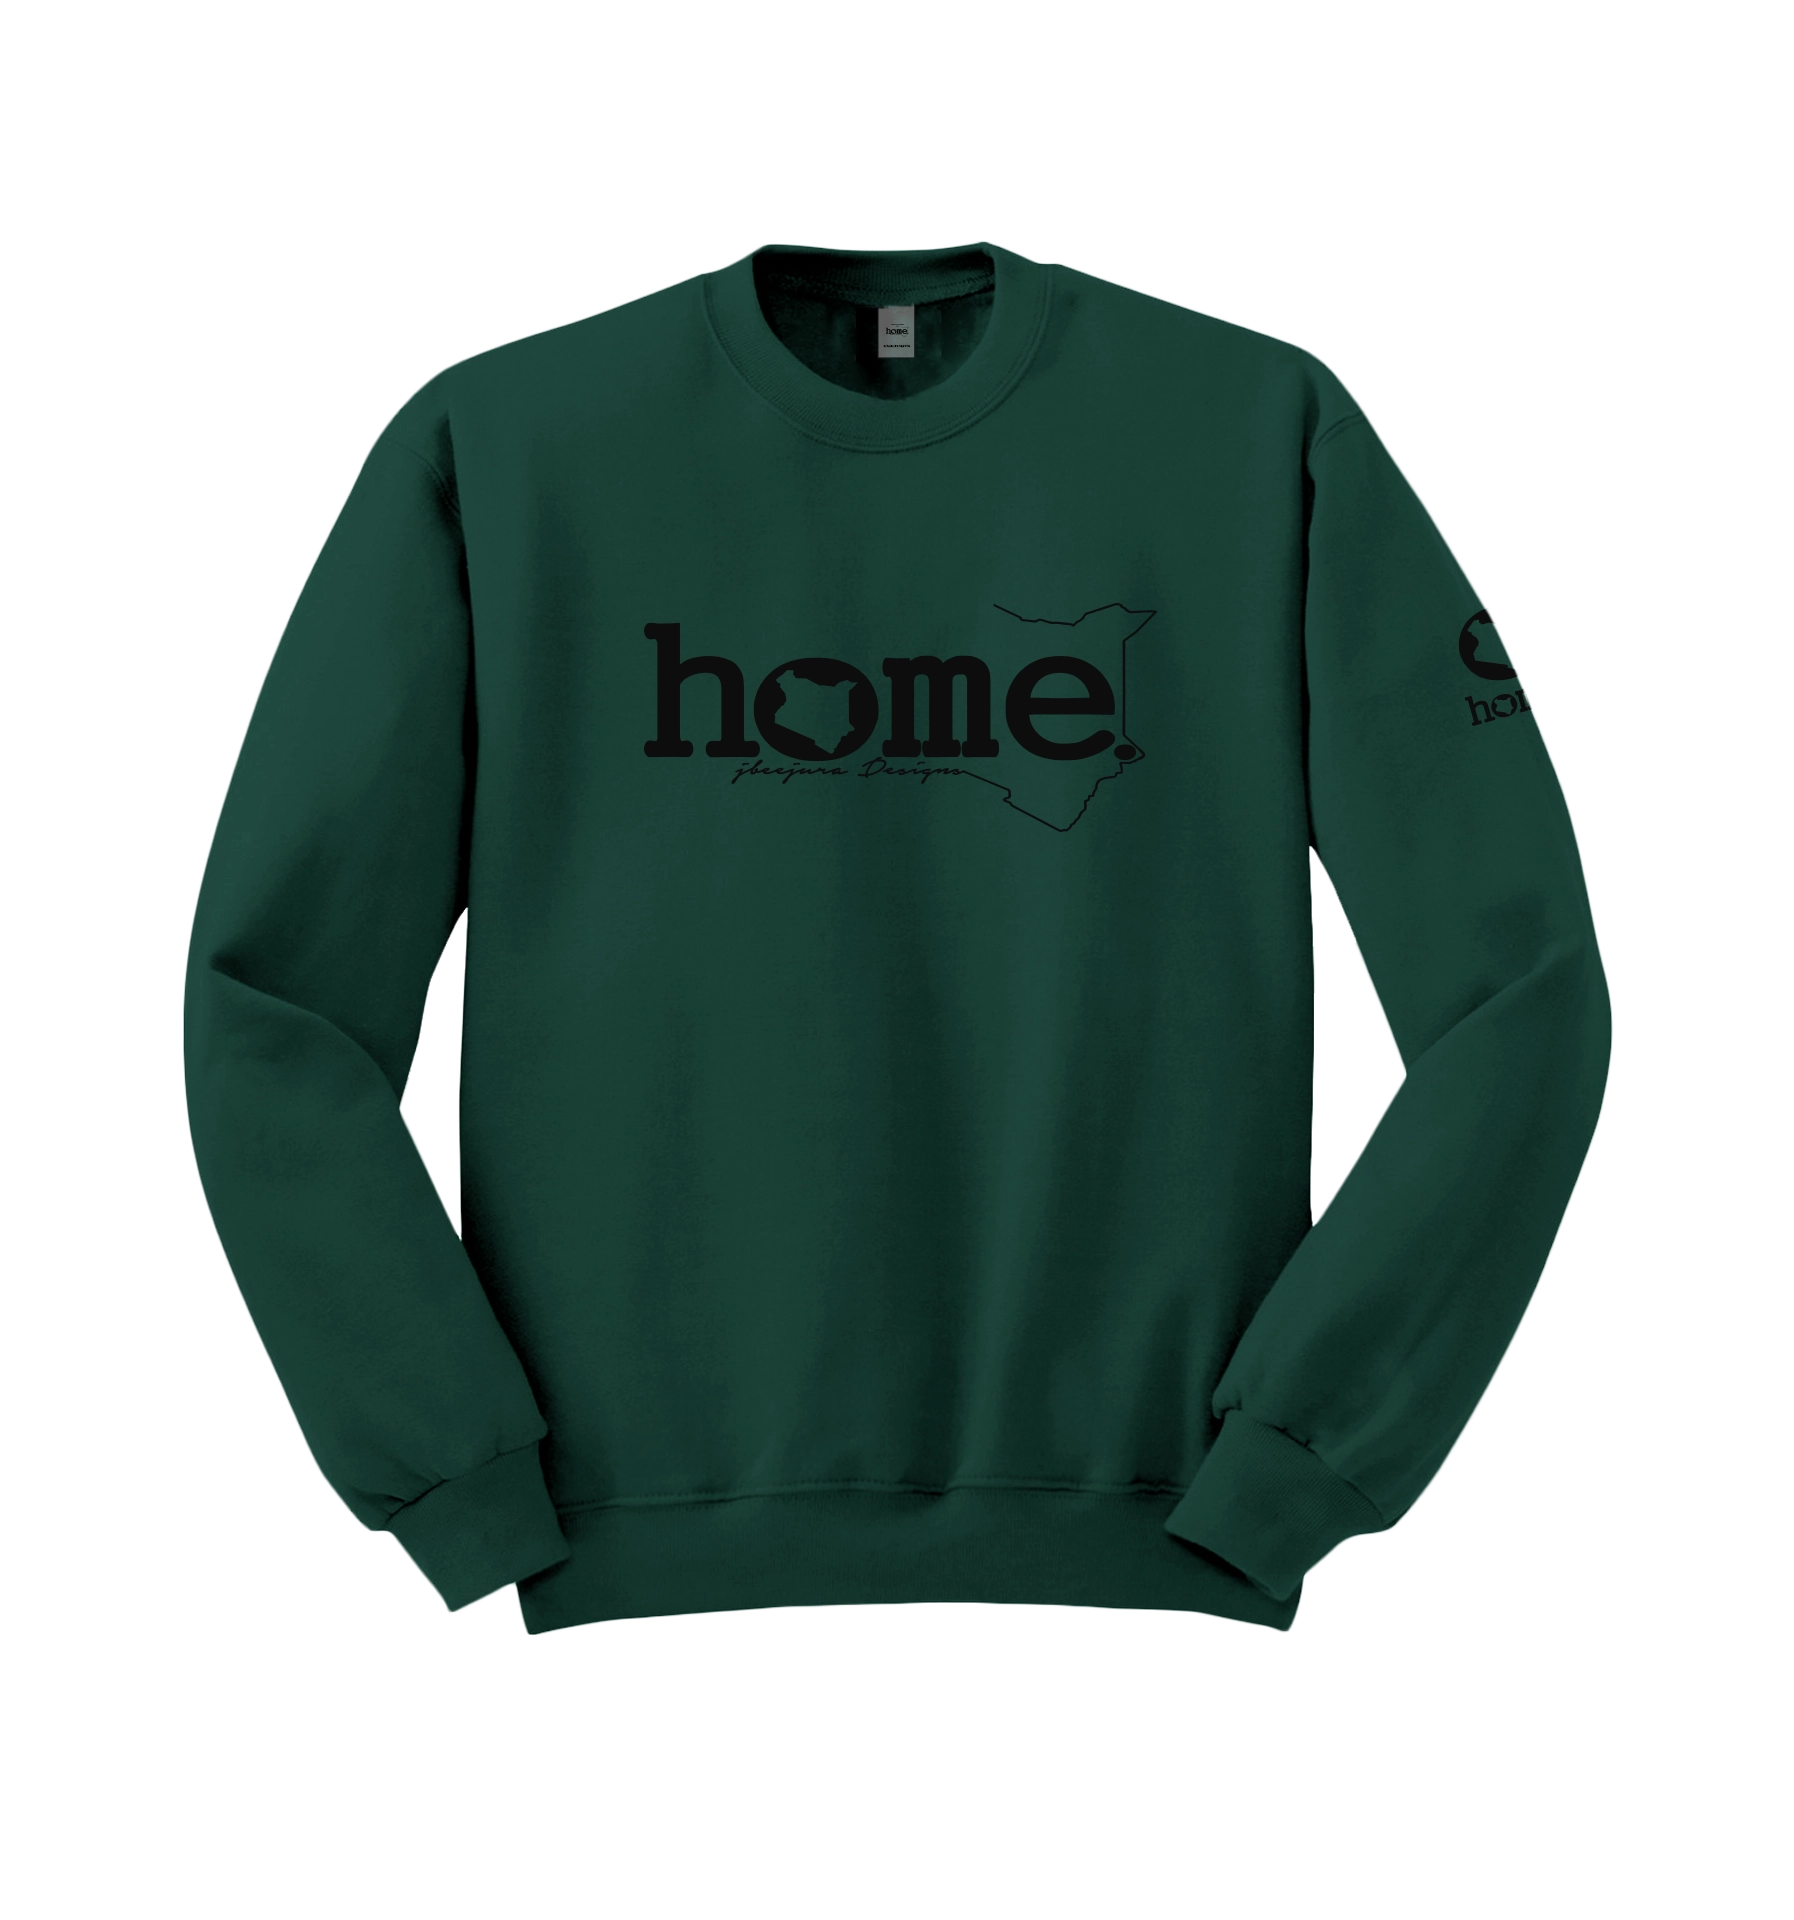 home_254 HUNTER GREEN SWEATSHIRT (NUVETRA™ HEAVY) WITH A BLACK CLASSIC WORDS PRINT